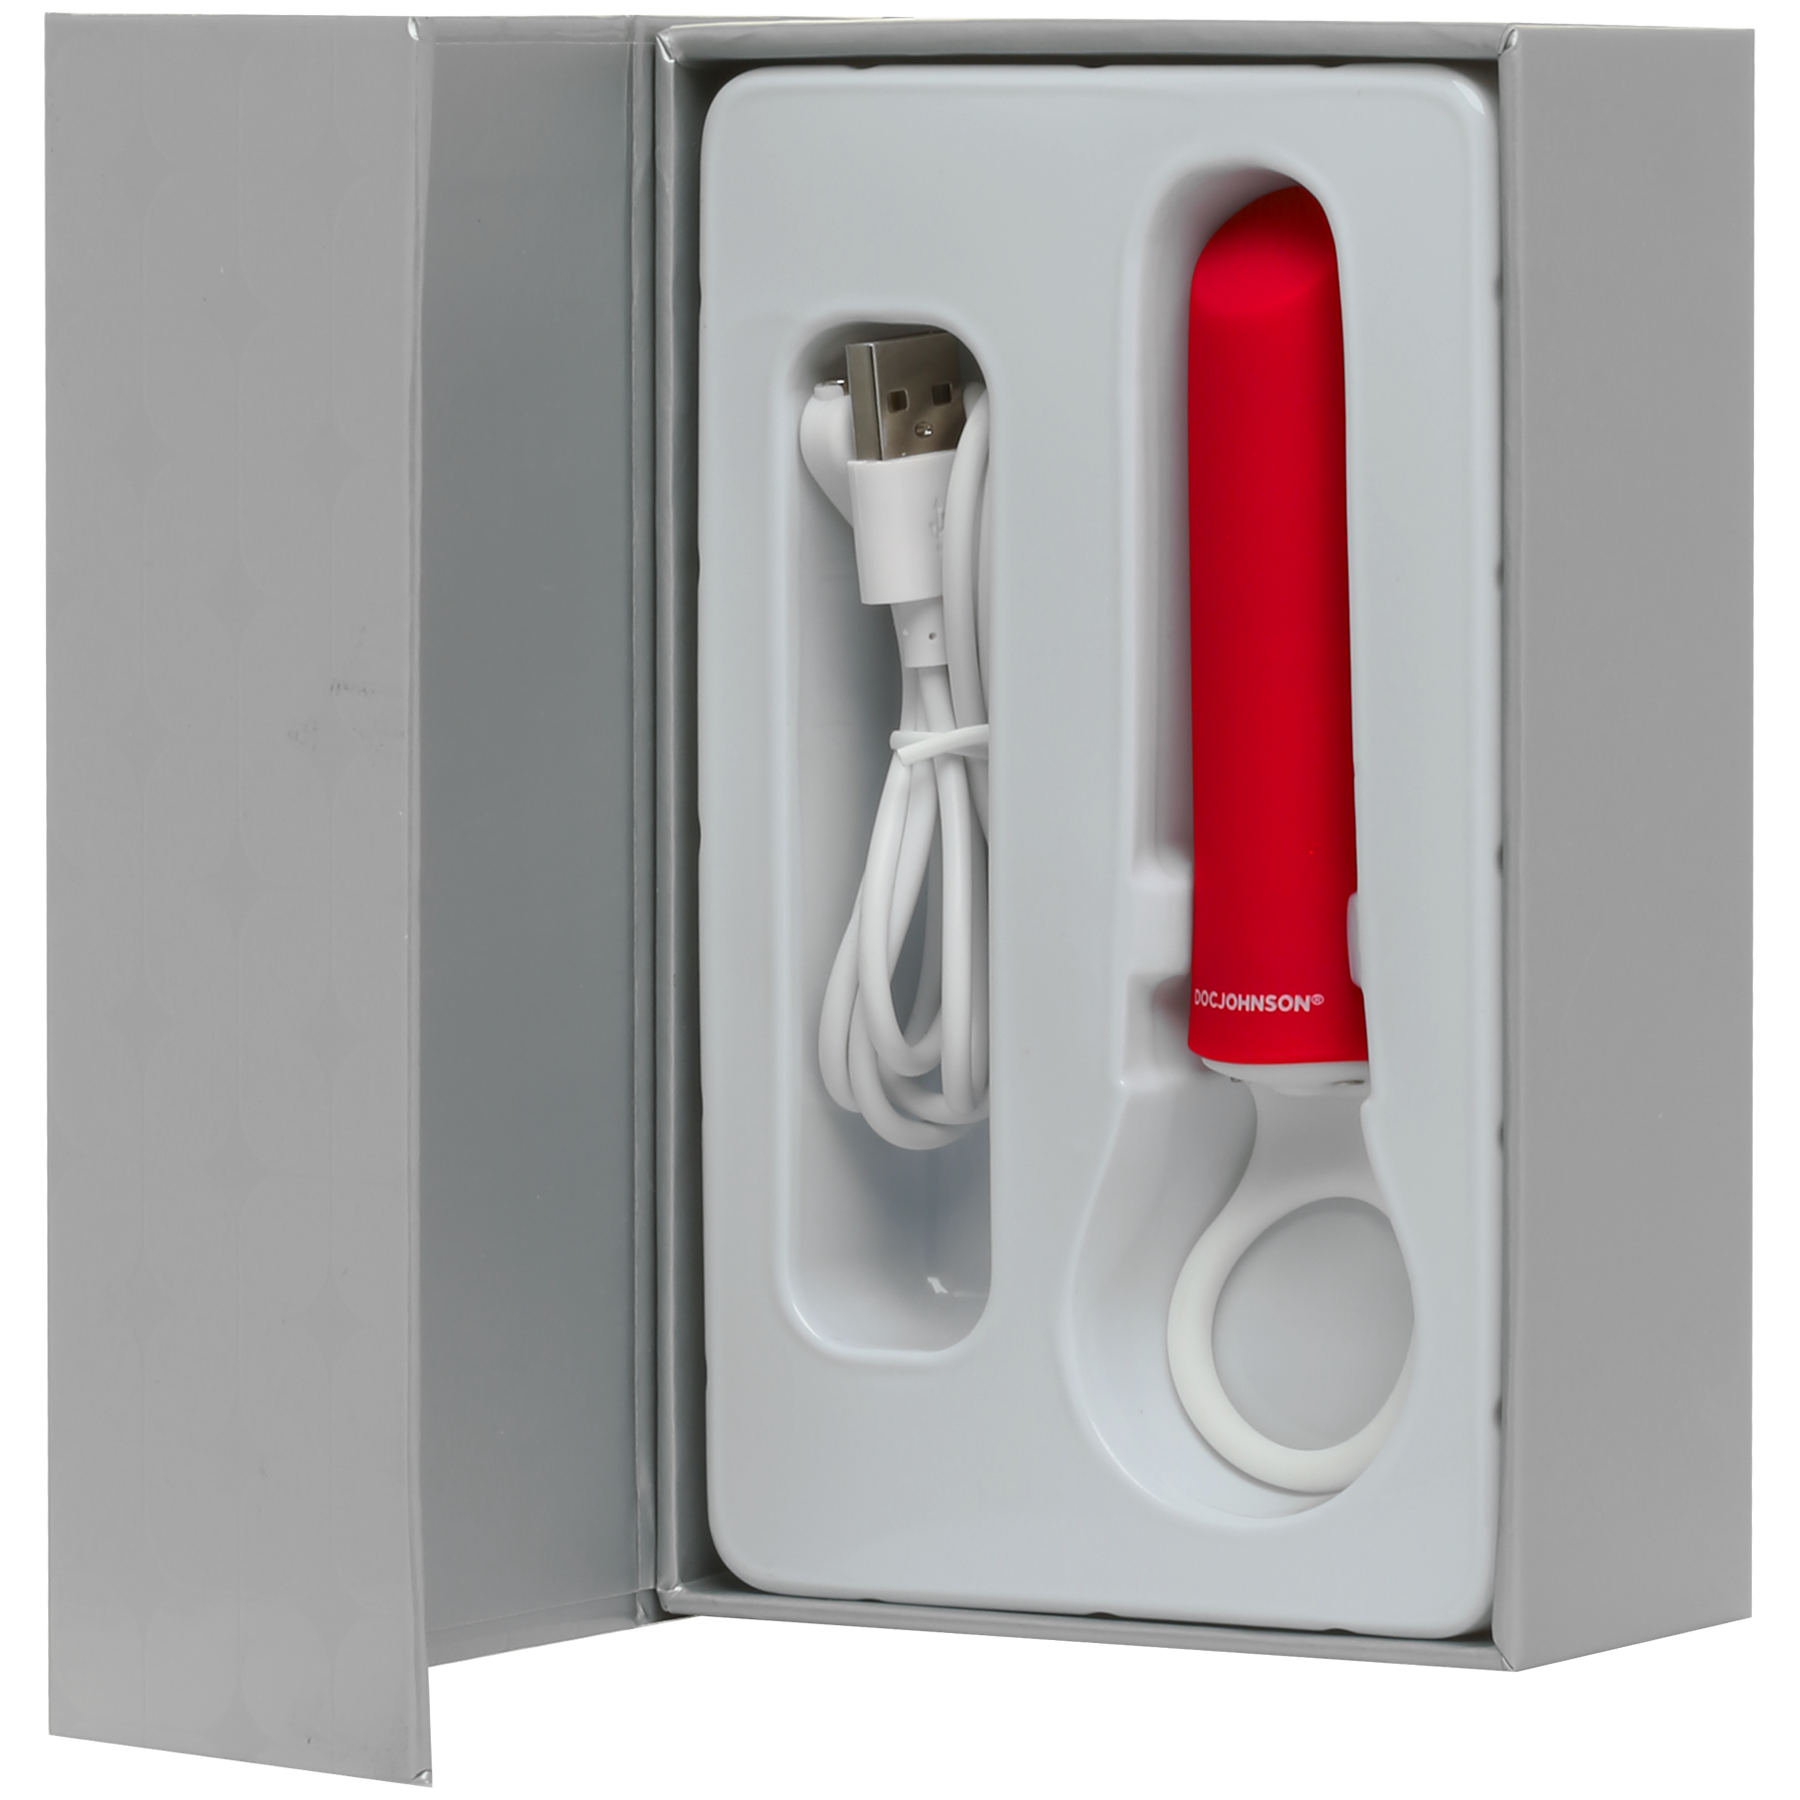 Limited Edition Red Mini-Vibe - iPlease by Doc Johnson